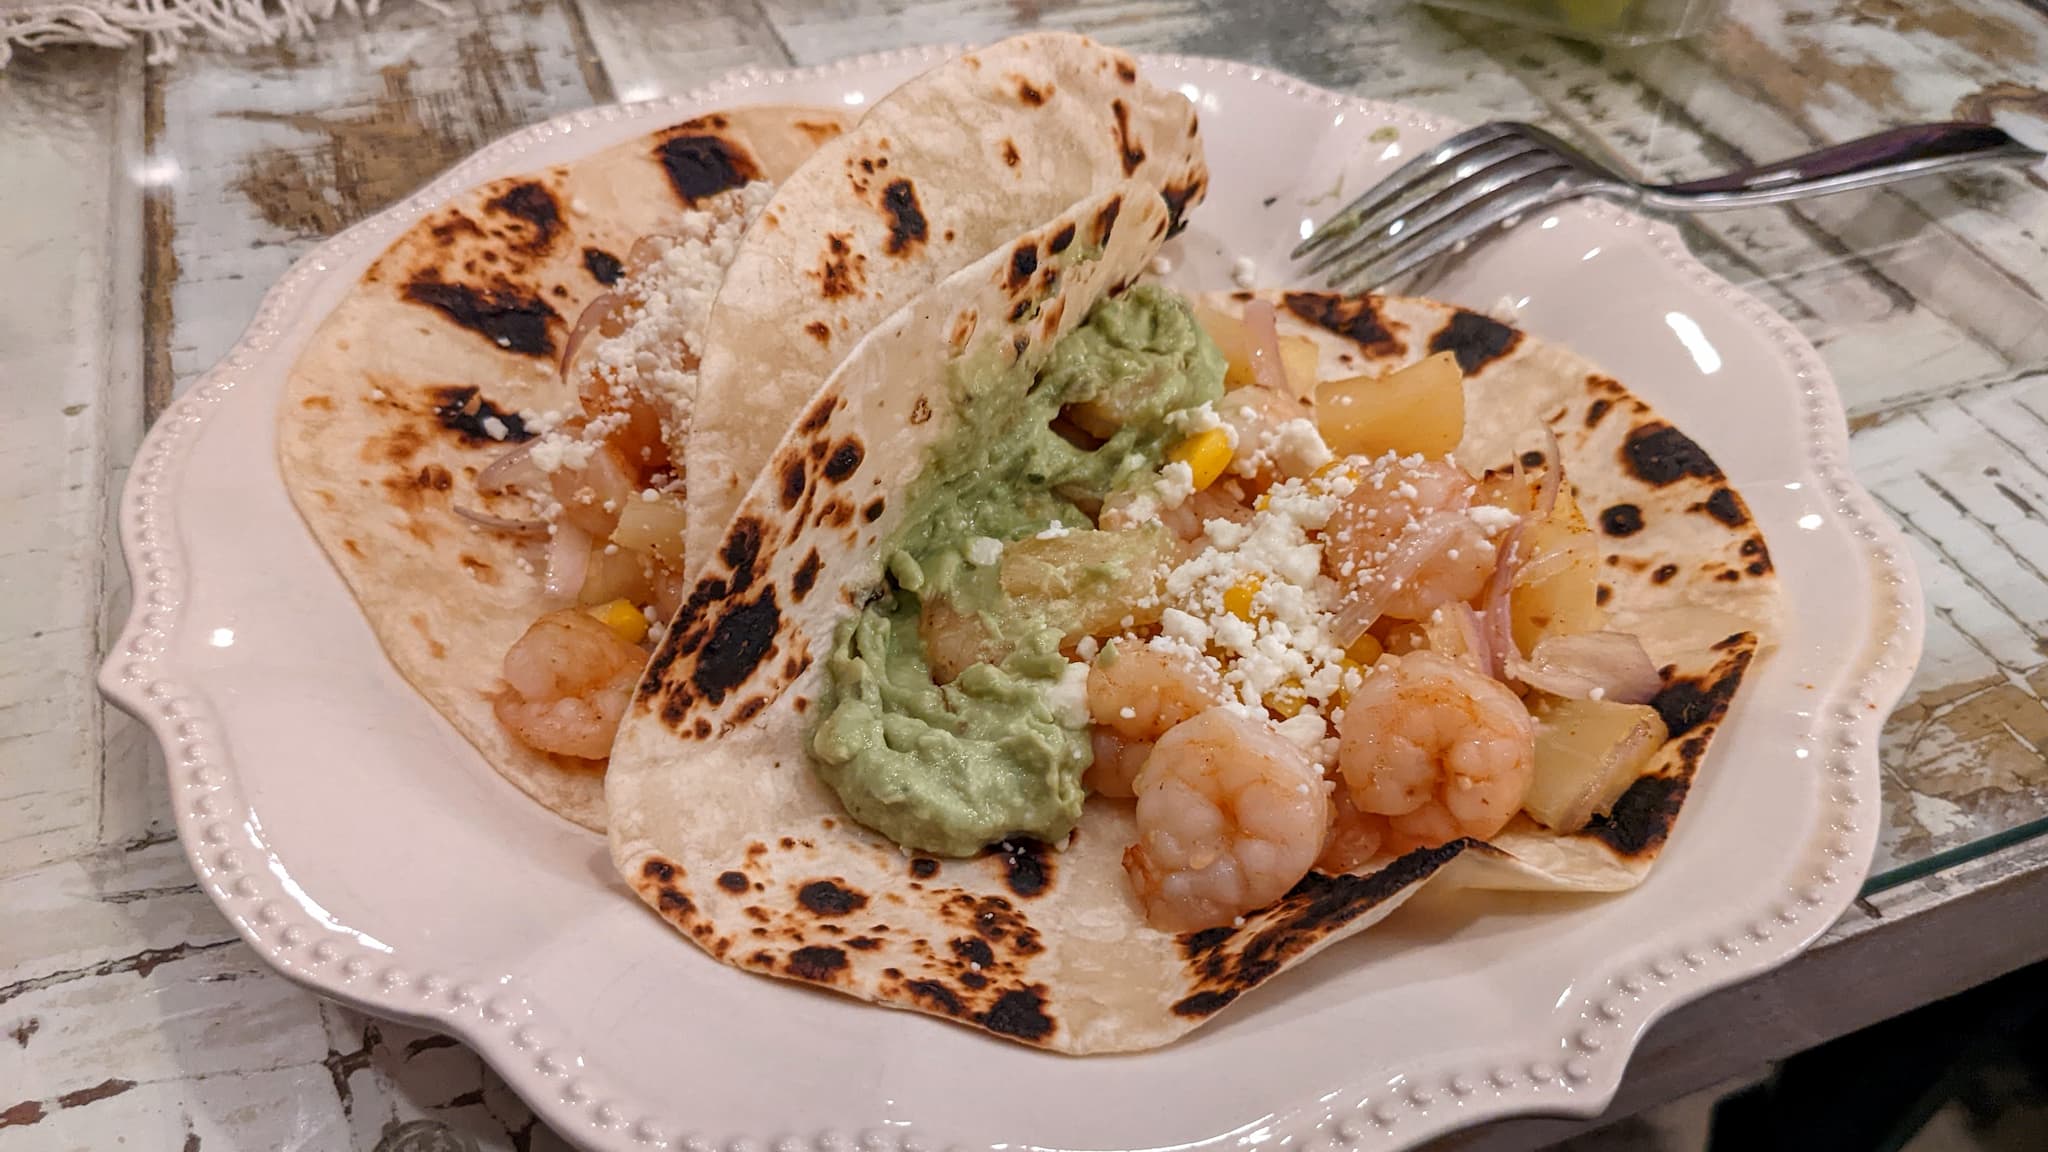 two tortillas filled with shimp, pinapple, and guacamole